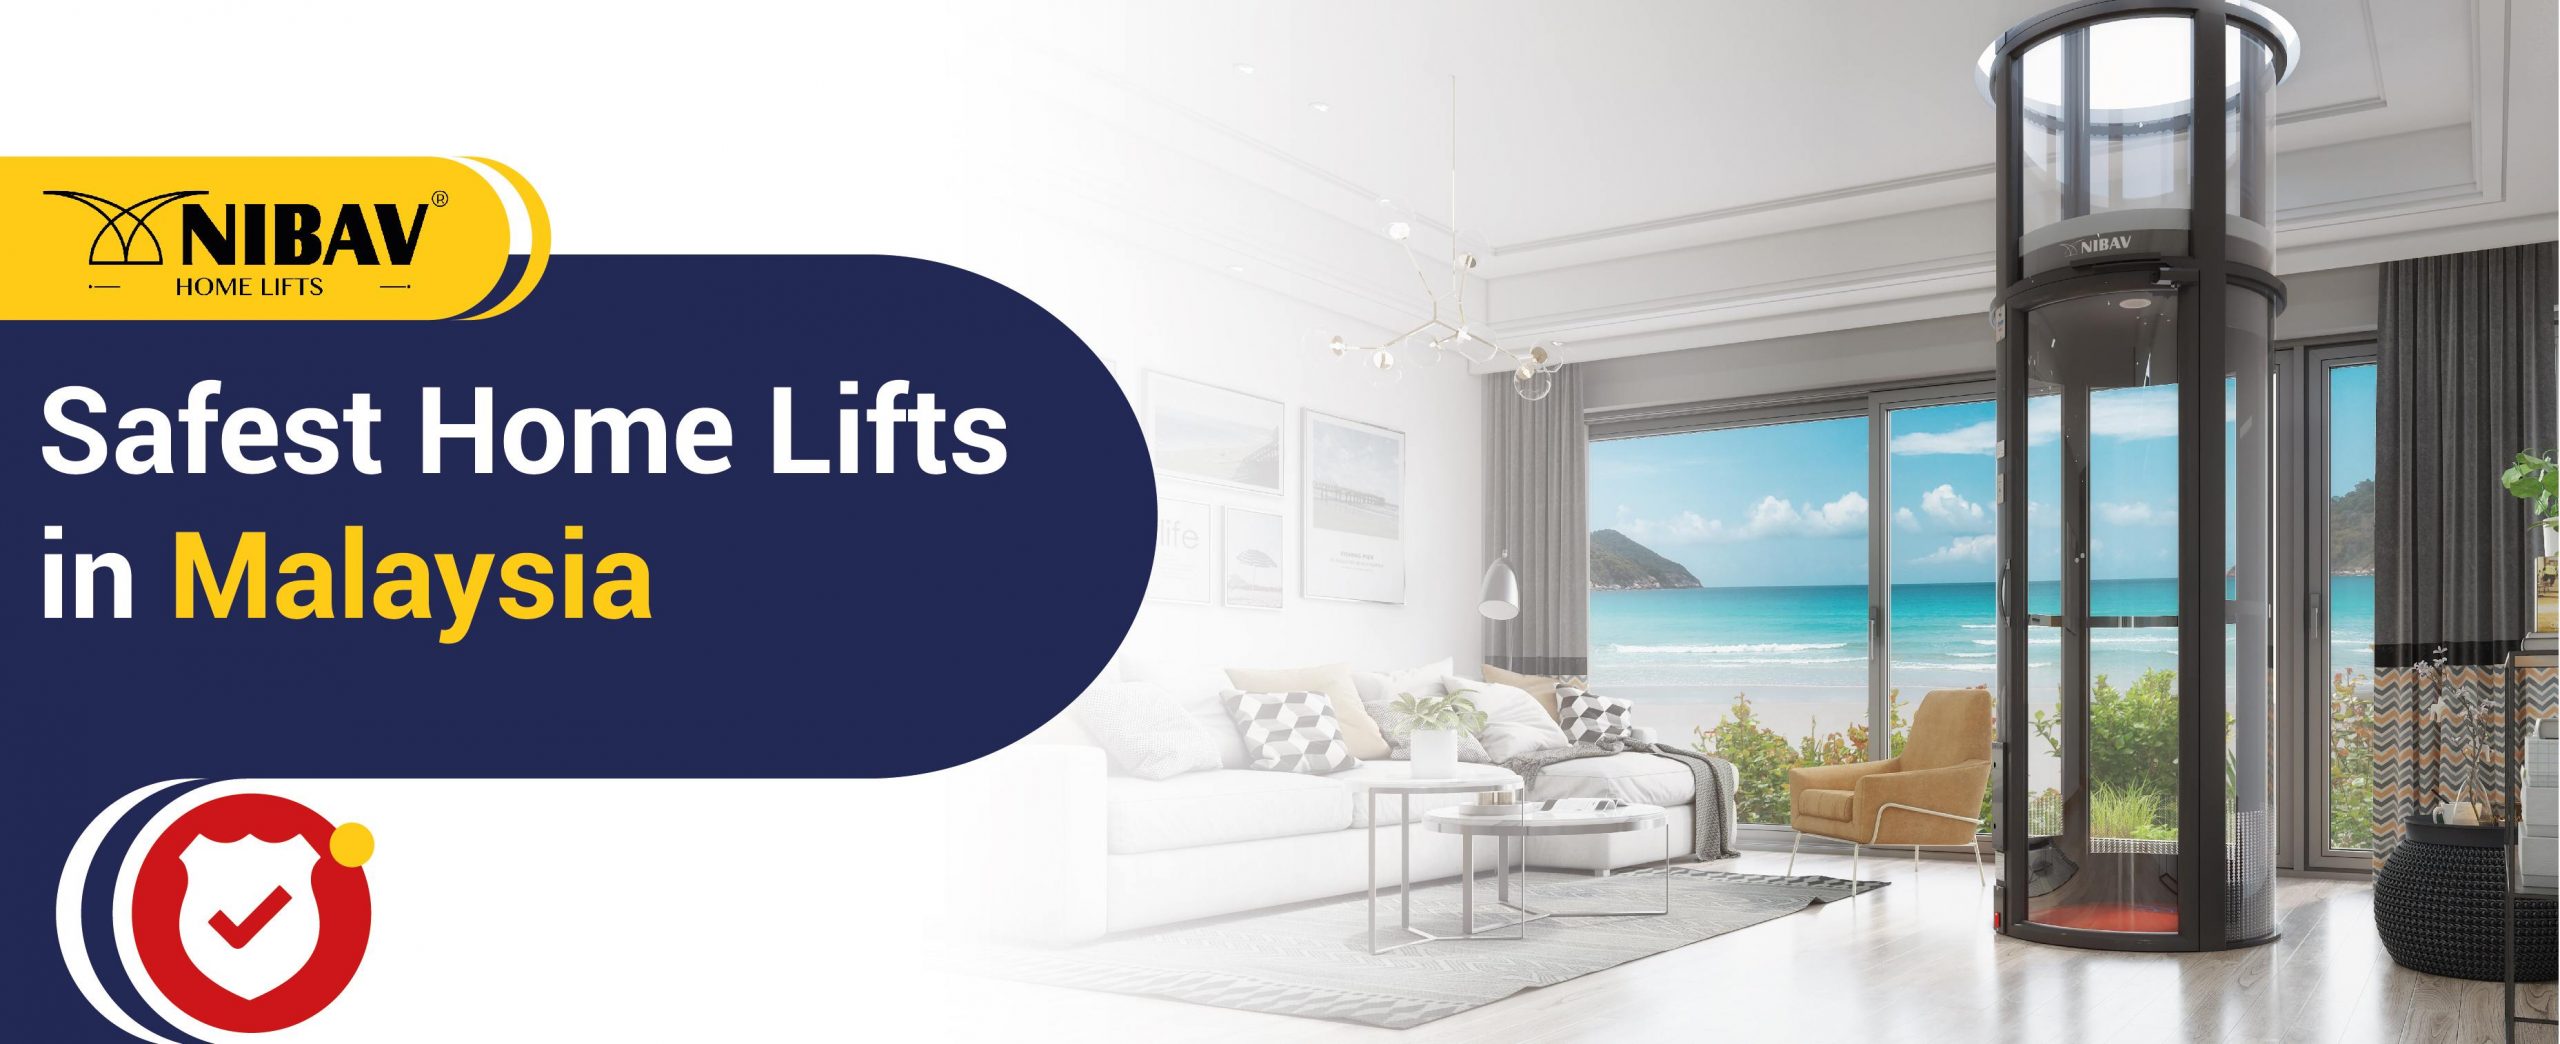 Safest Home Lifts in Malaysia